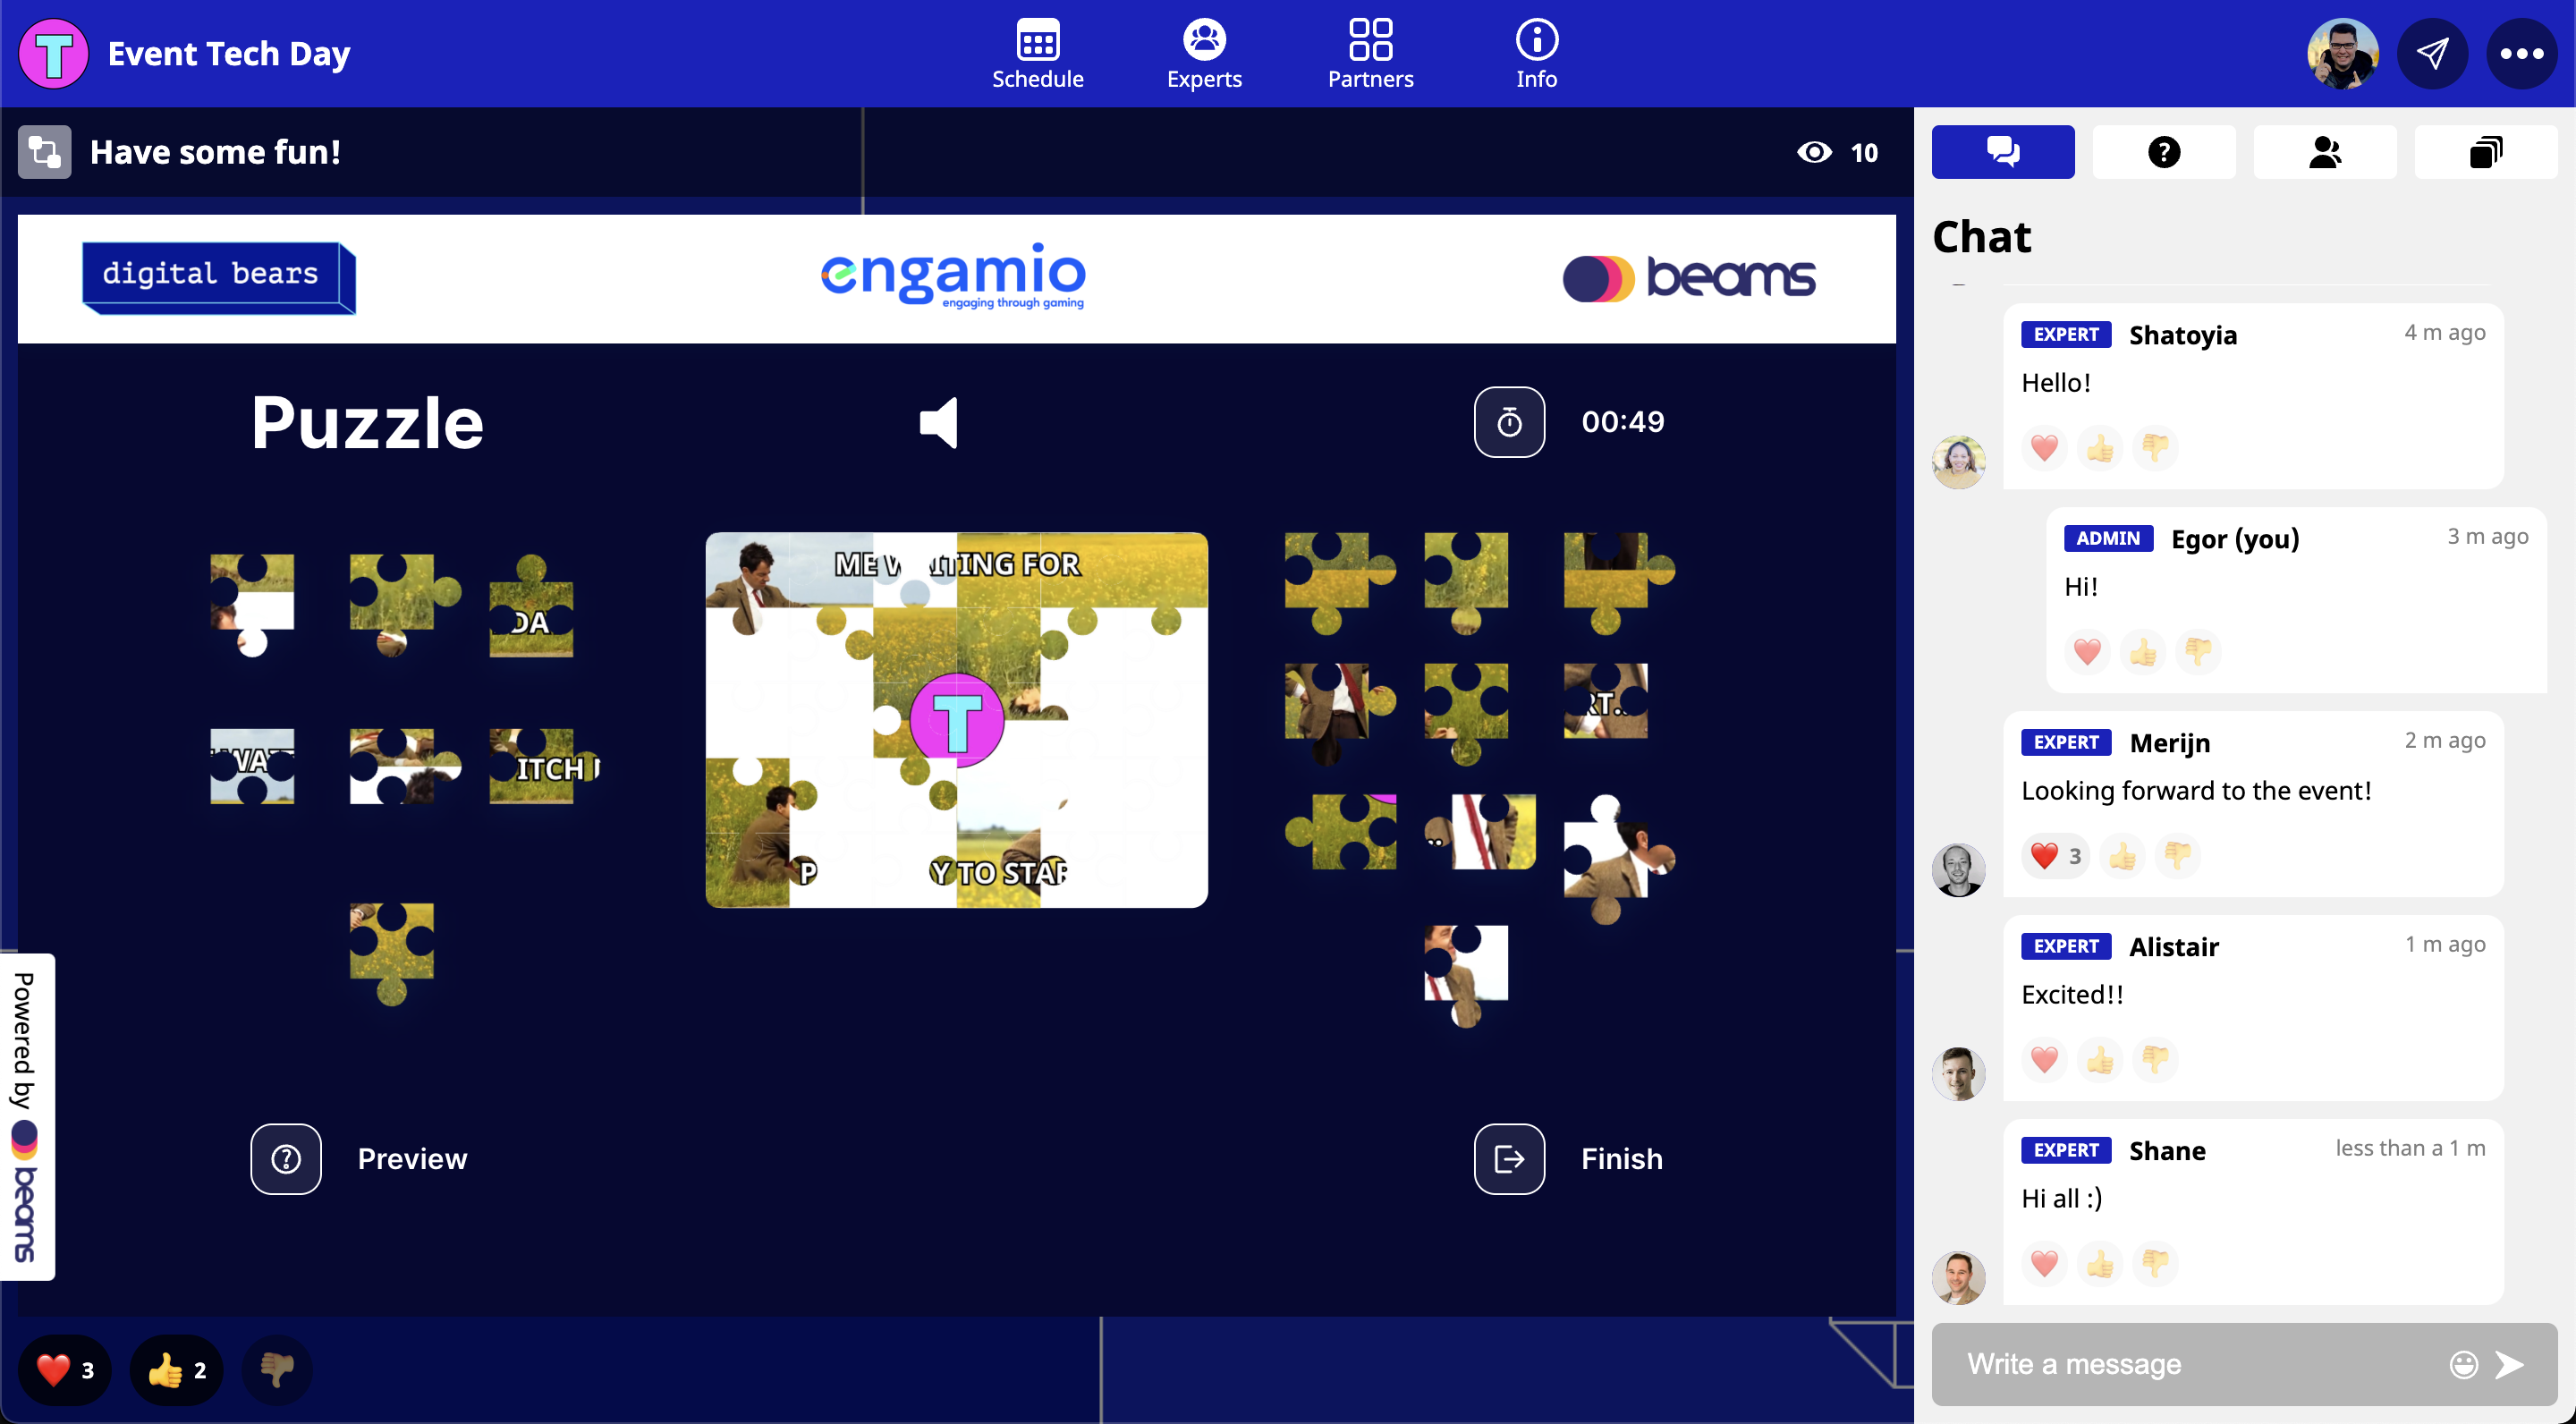 Entertaining options: games, quests, tests intergrated via the services like Engamio